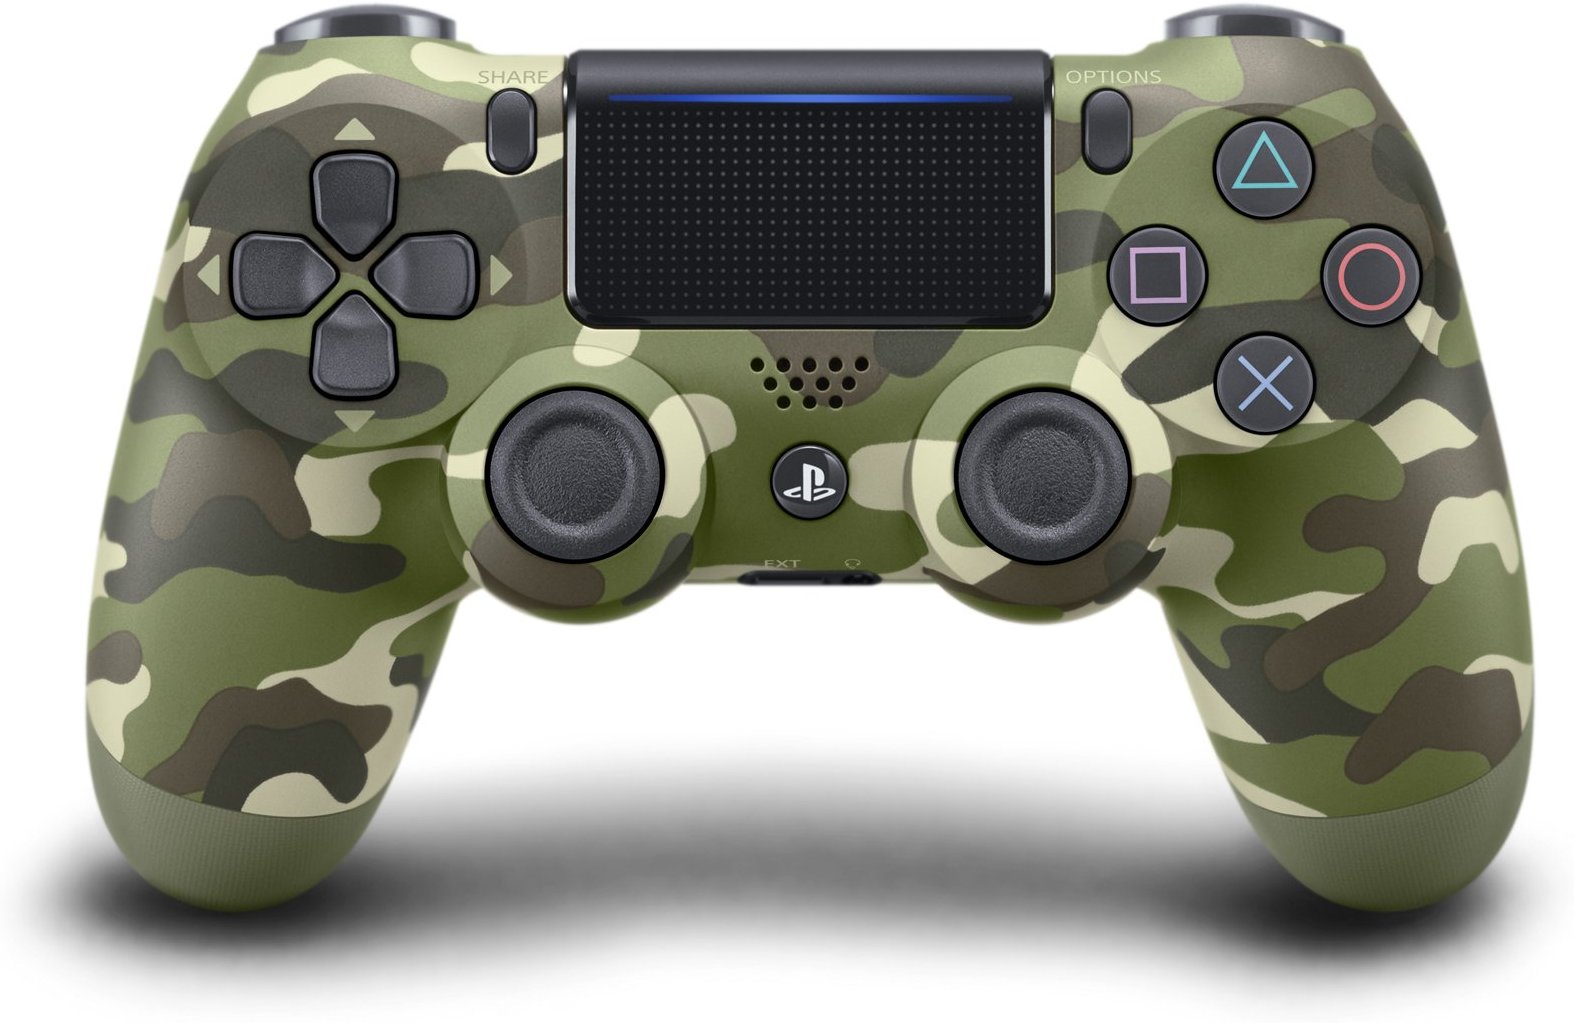 DualShock 4 Wireless Controller for PlayStation 4 - Green Camouf